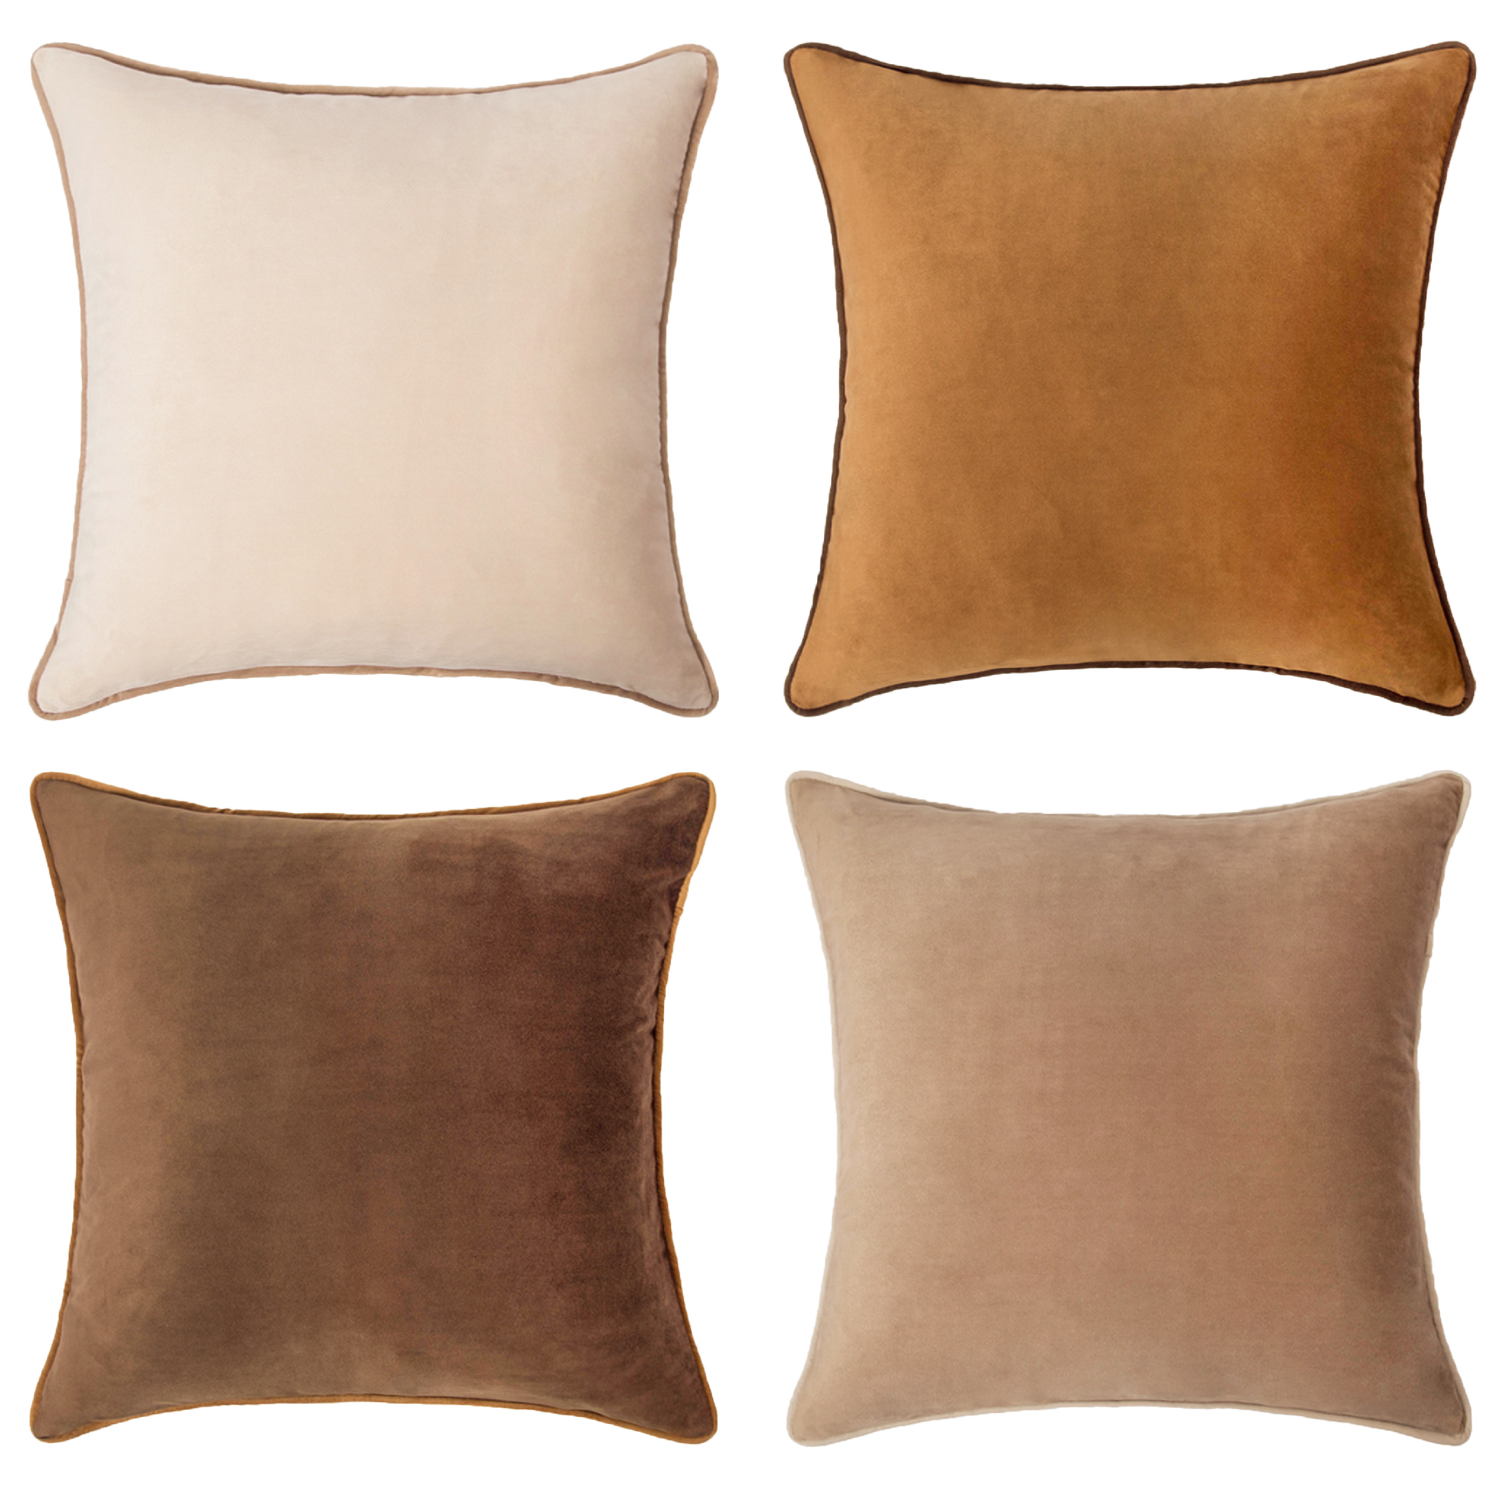 WEMEON Velvet Decorative Neutral Throw Pillows Covers 20x20inch Set of 4,  Solid Color Soft Decorative Square Neutral Pillow Cover ，Home Neutral Decor